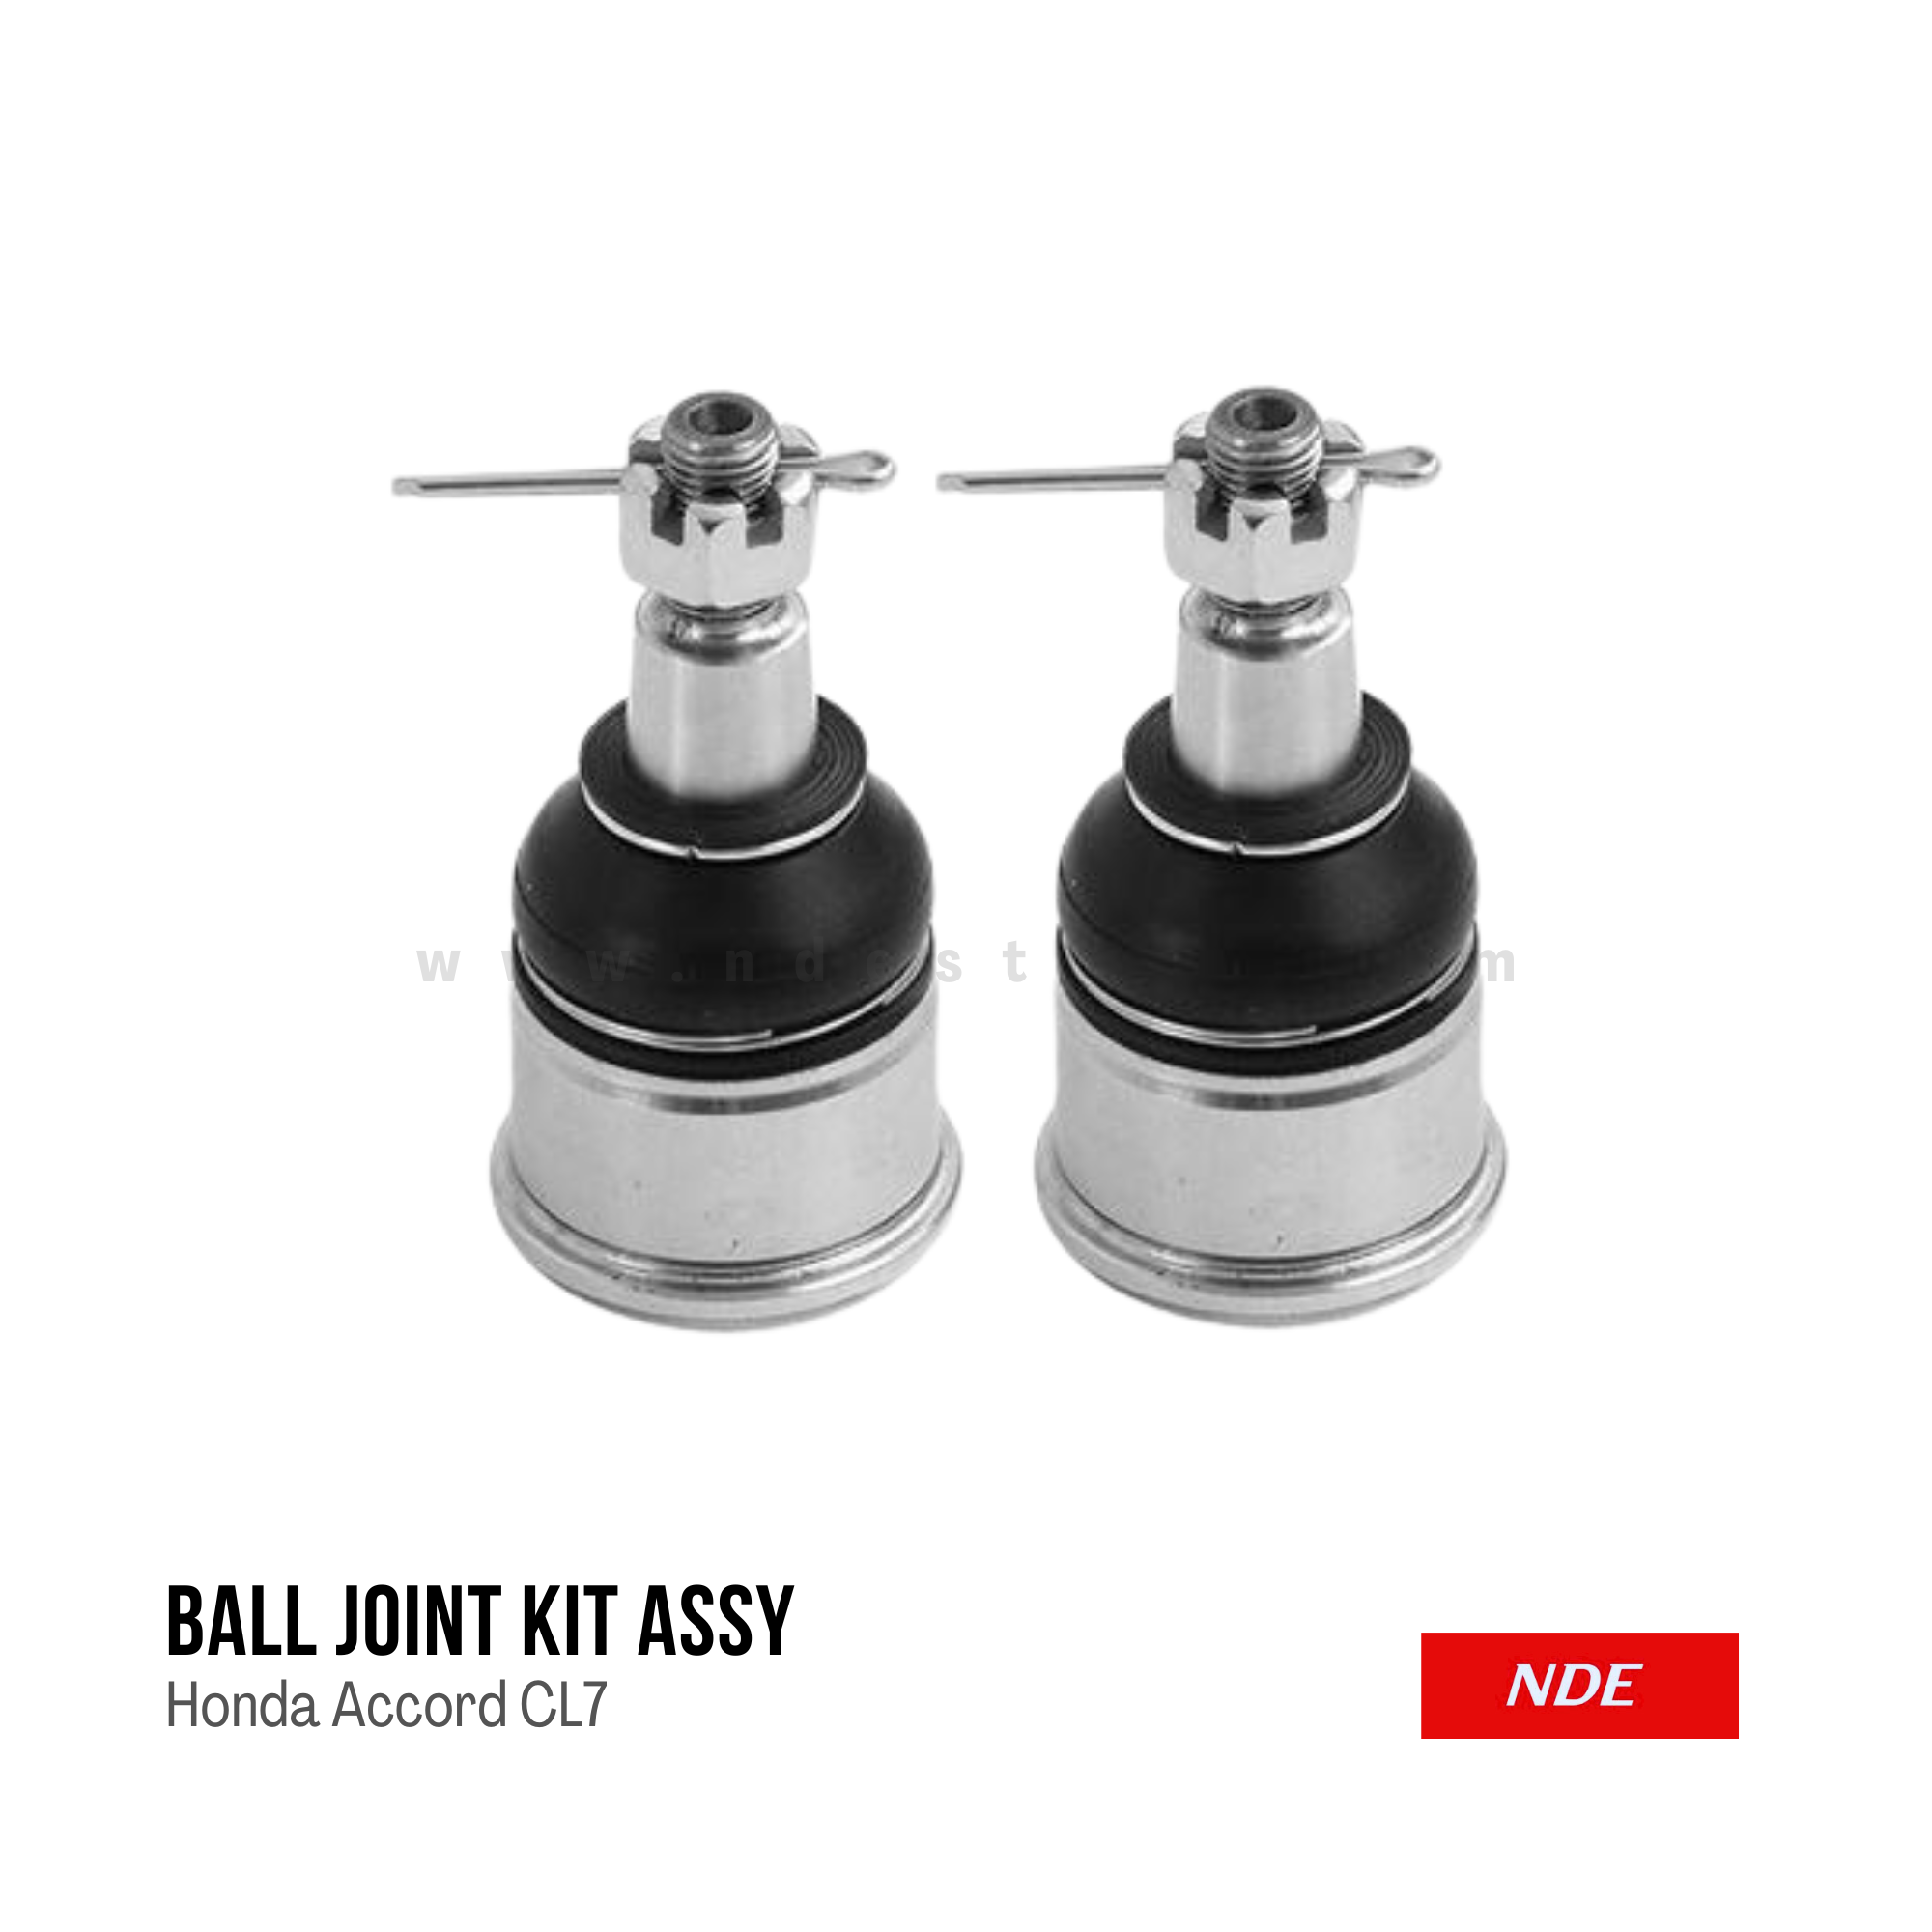 BALL JOINT KIT FOR HONDA ACCORD CL7